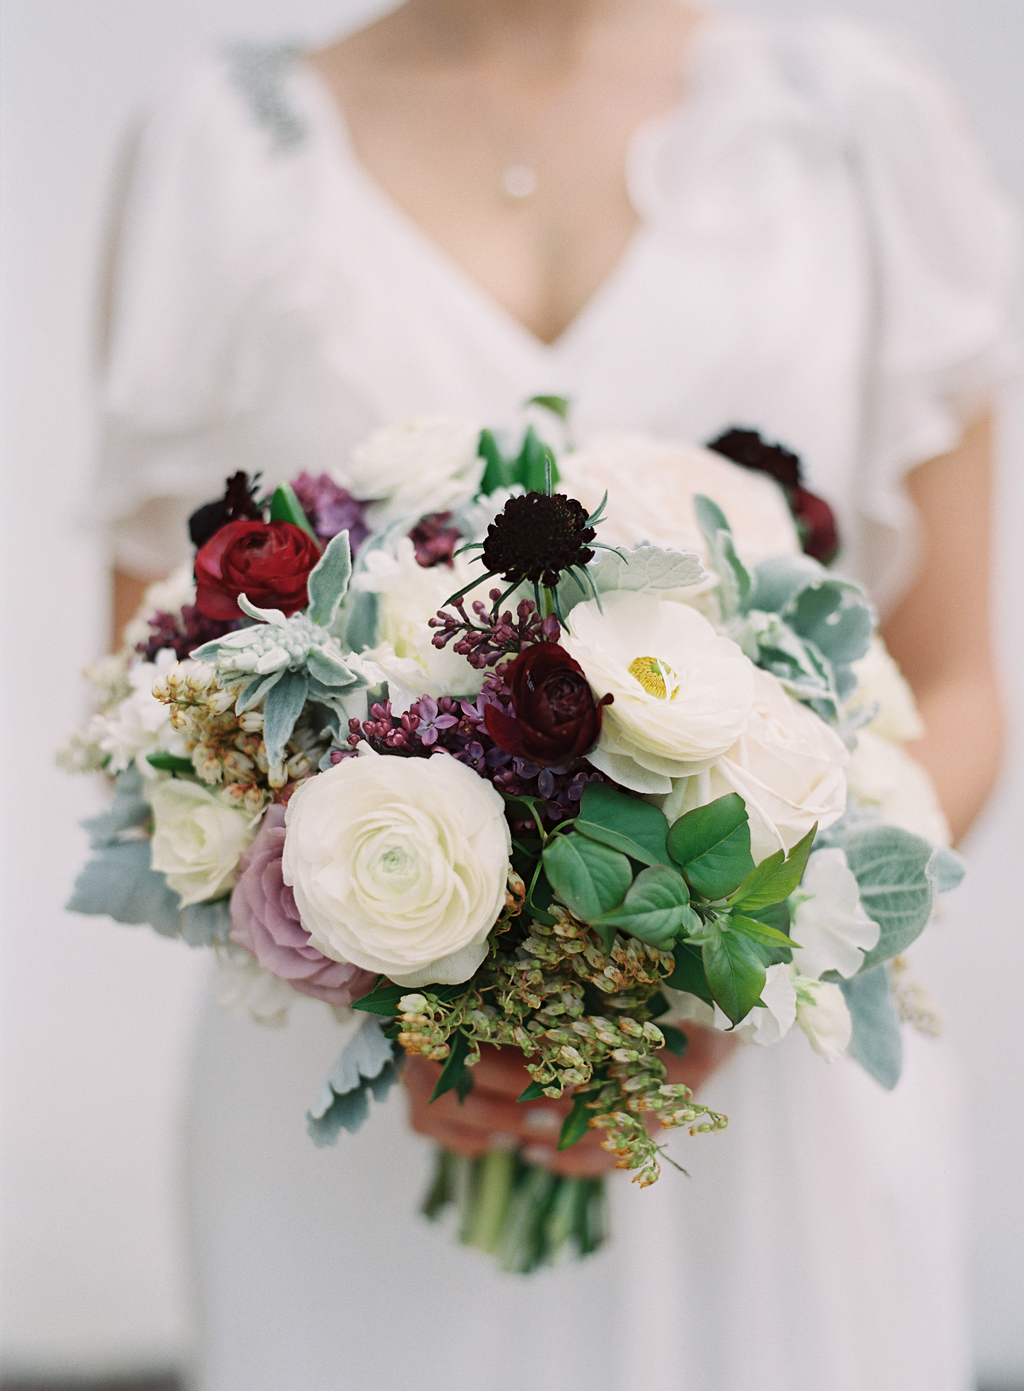 brides bouquet by art with nature on her wedding day at franciscan gardens in orange county